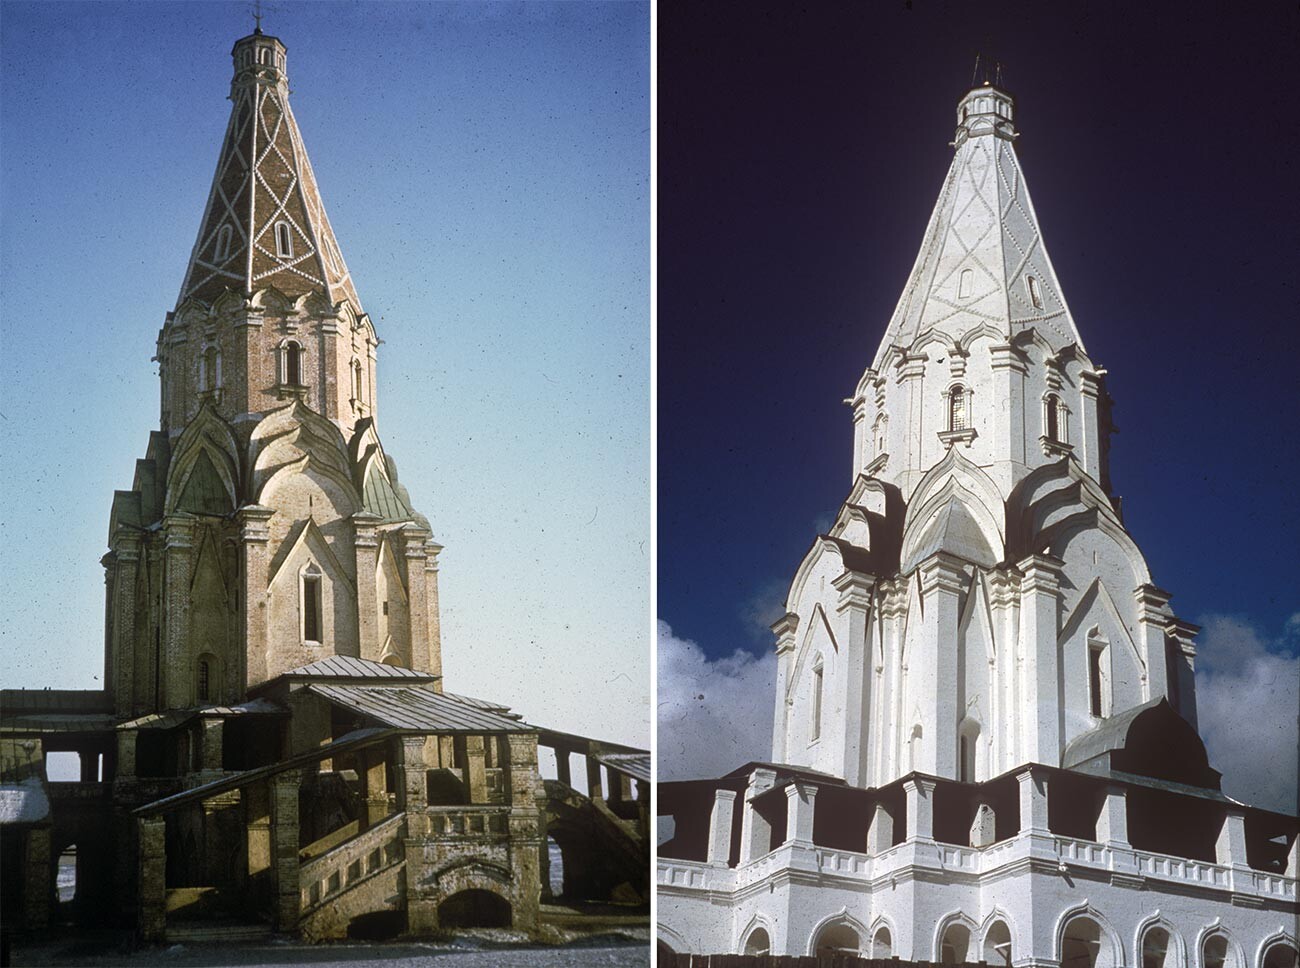 Left: Church of the Ascension at Kolomenskoye. Northwest view. February 20, 1972.
Right: Southeast view taken after whitewashing of church before 1980 Olympics. September 29, 1979